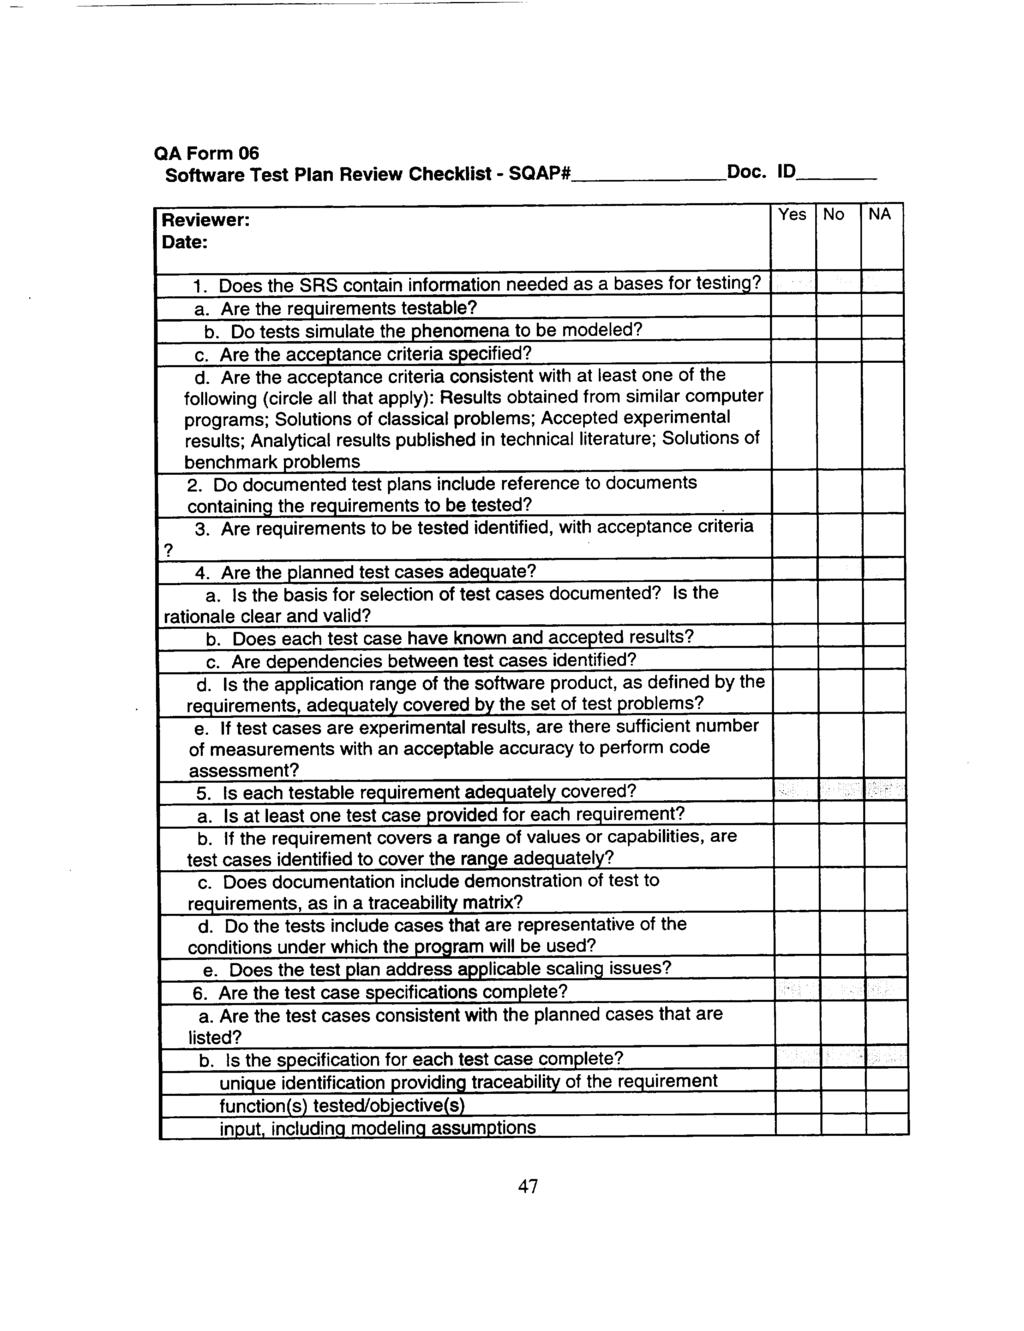 QA Form 06 Software Test Plan Review Checklist - SQAP# Doc. ID Reviewer: Yes No NA Date: 1. Does the SRS contain information needed as a bases for testing? a. Are the requirements testable? b. Do tests simulate the phenomena to be modeled?